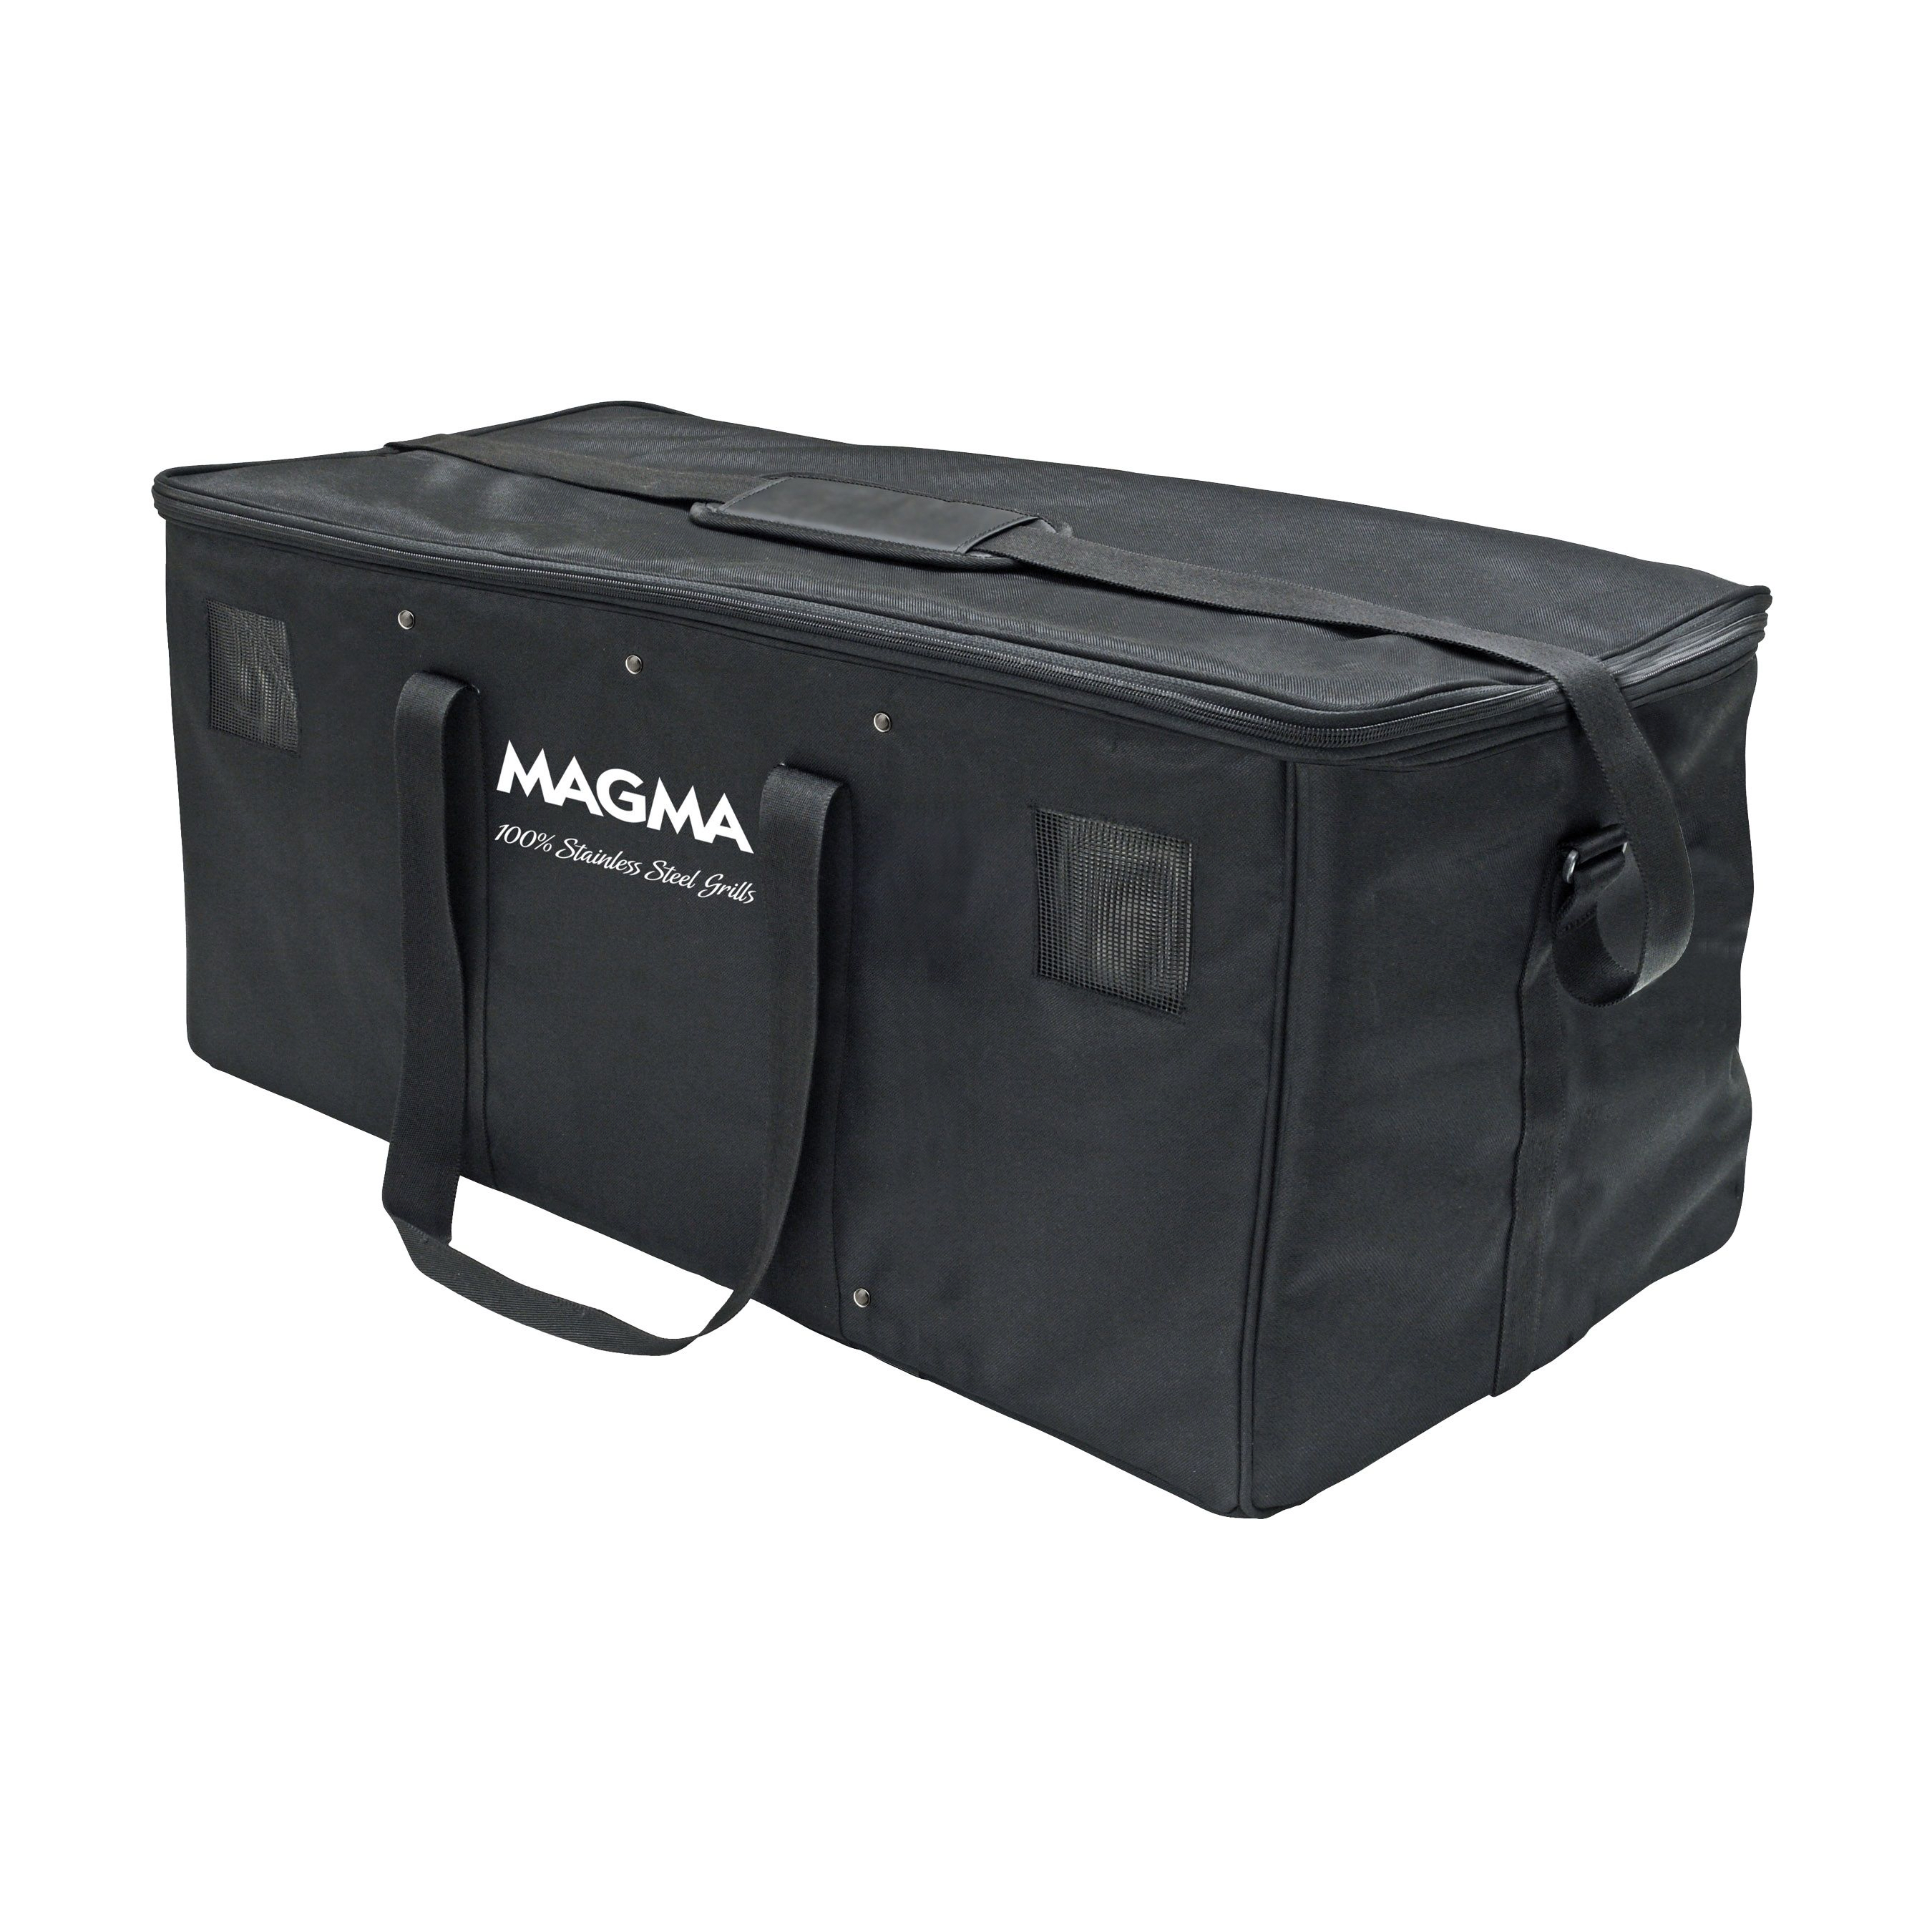 Magma Padded Grill & Accessory Case - A10-992